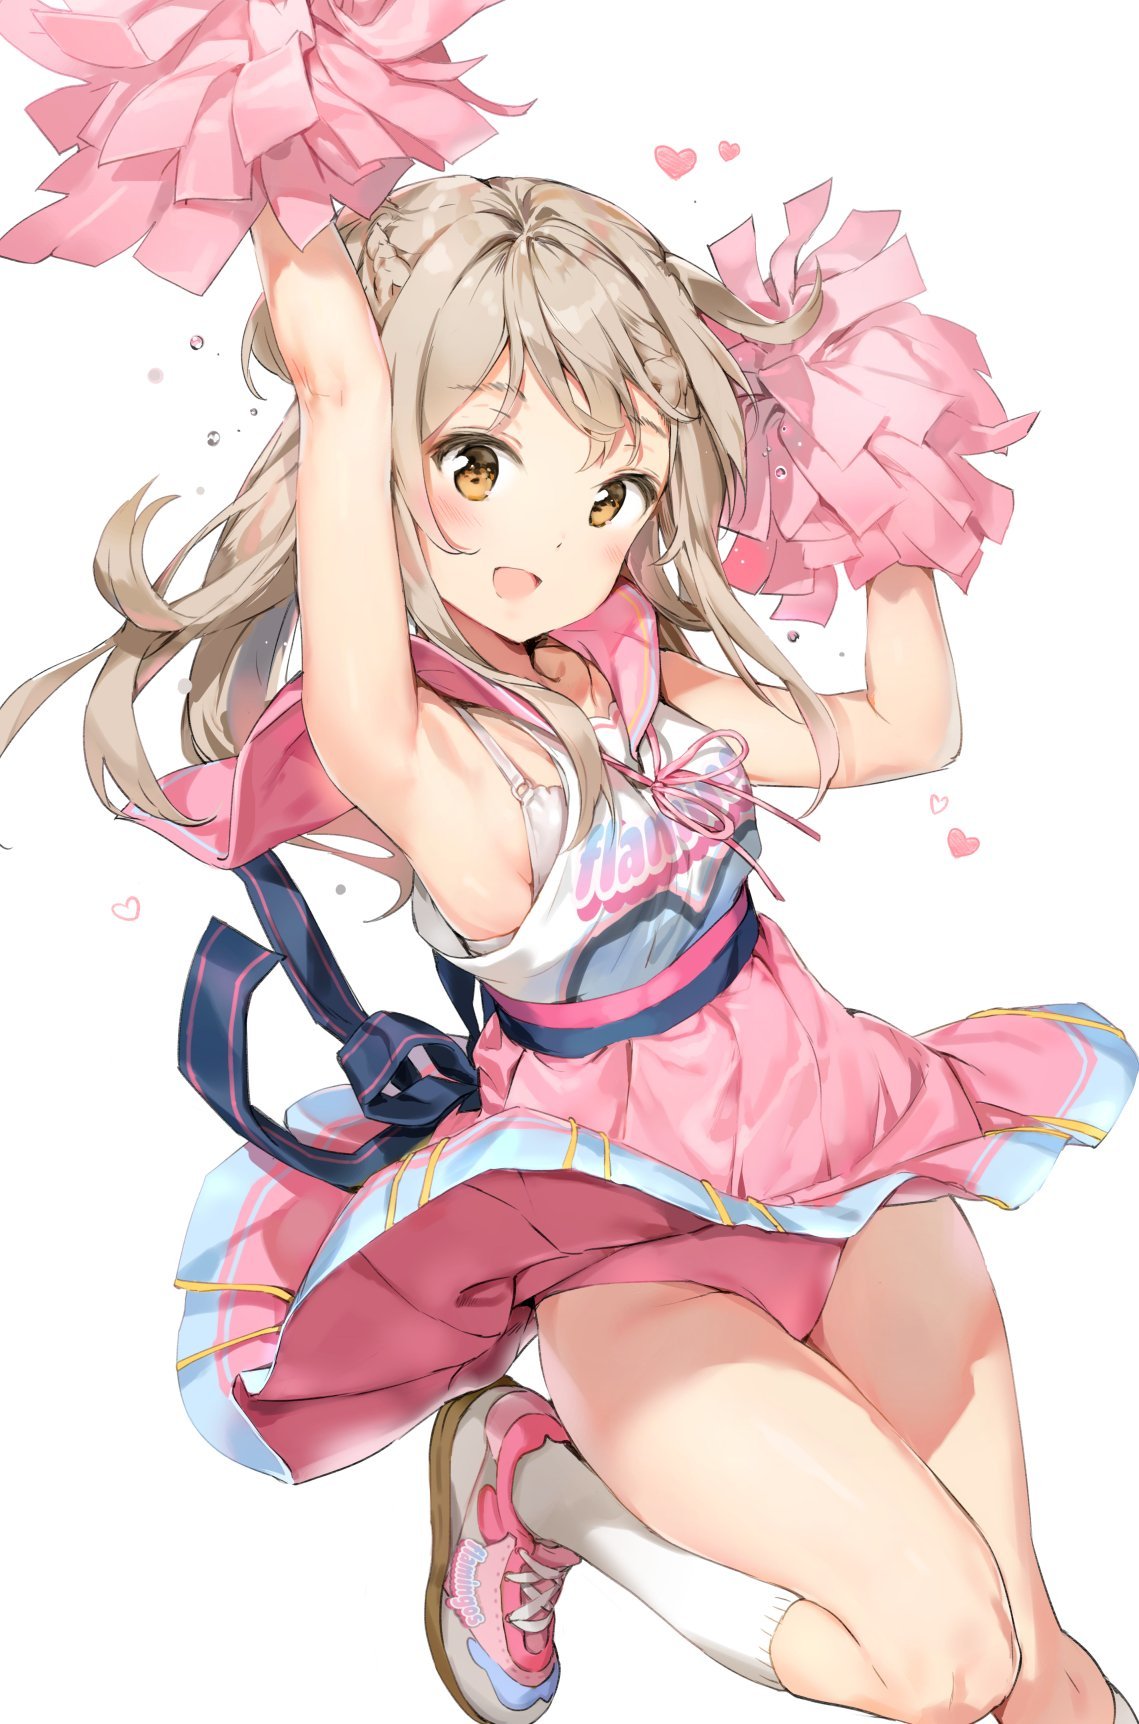 Cheering For You! [Original]